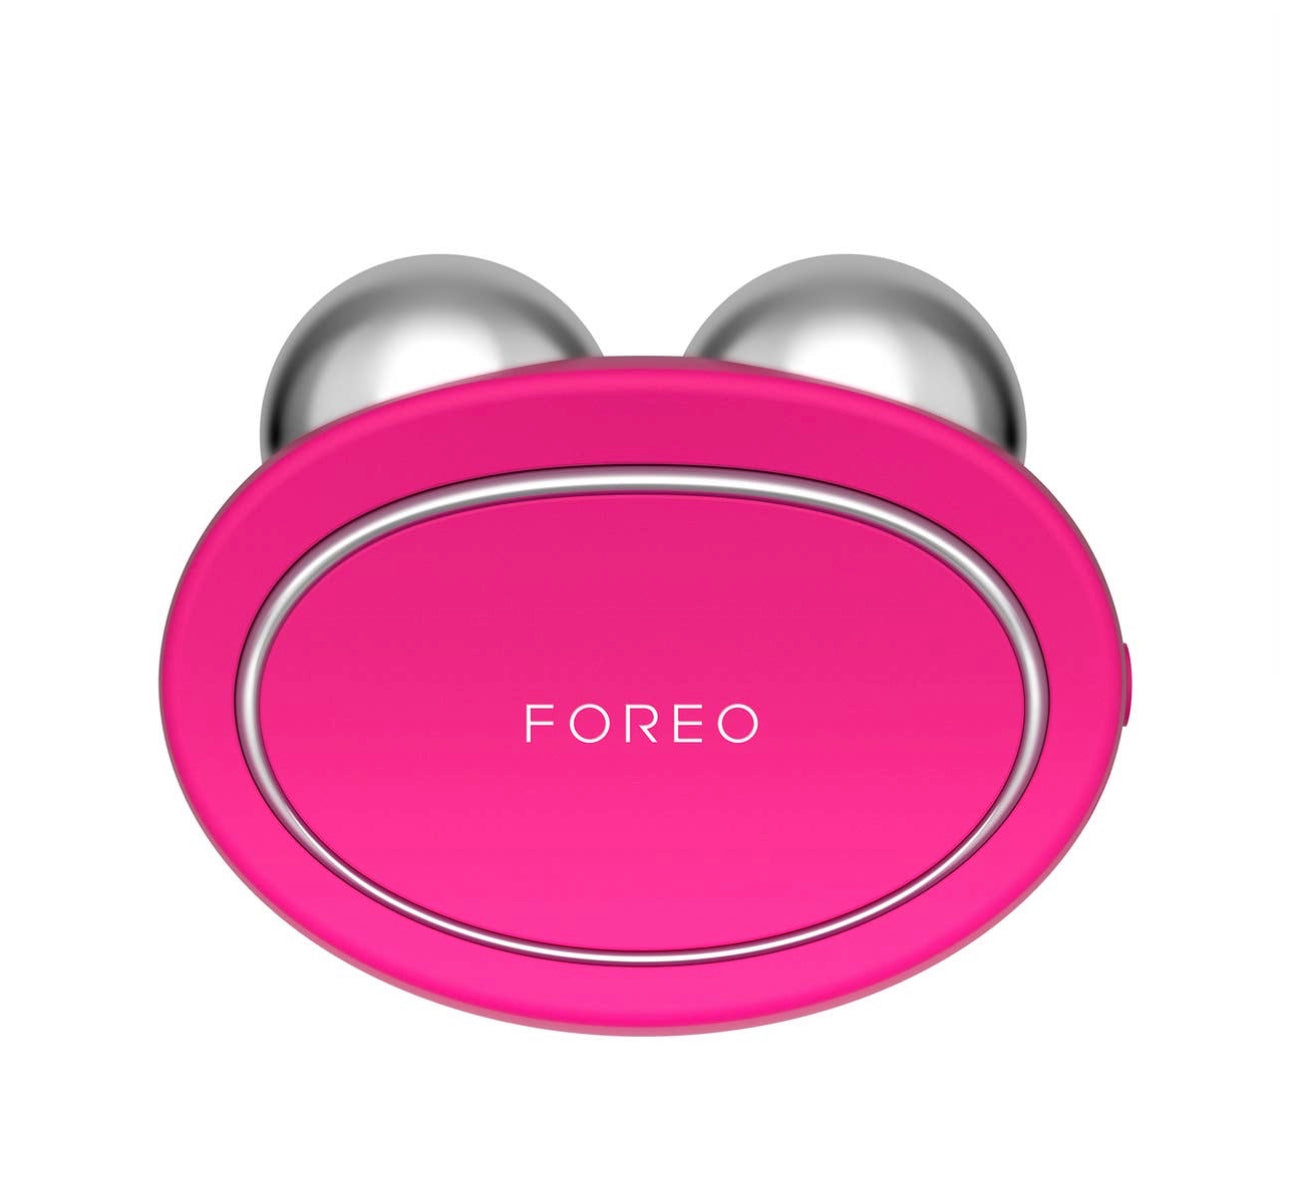 Foreo Sculpting Facial Device